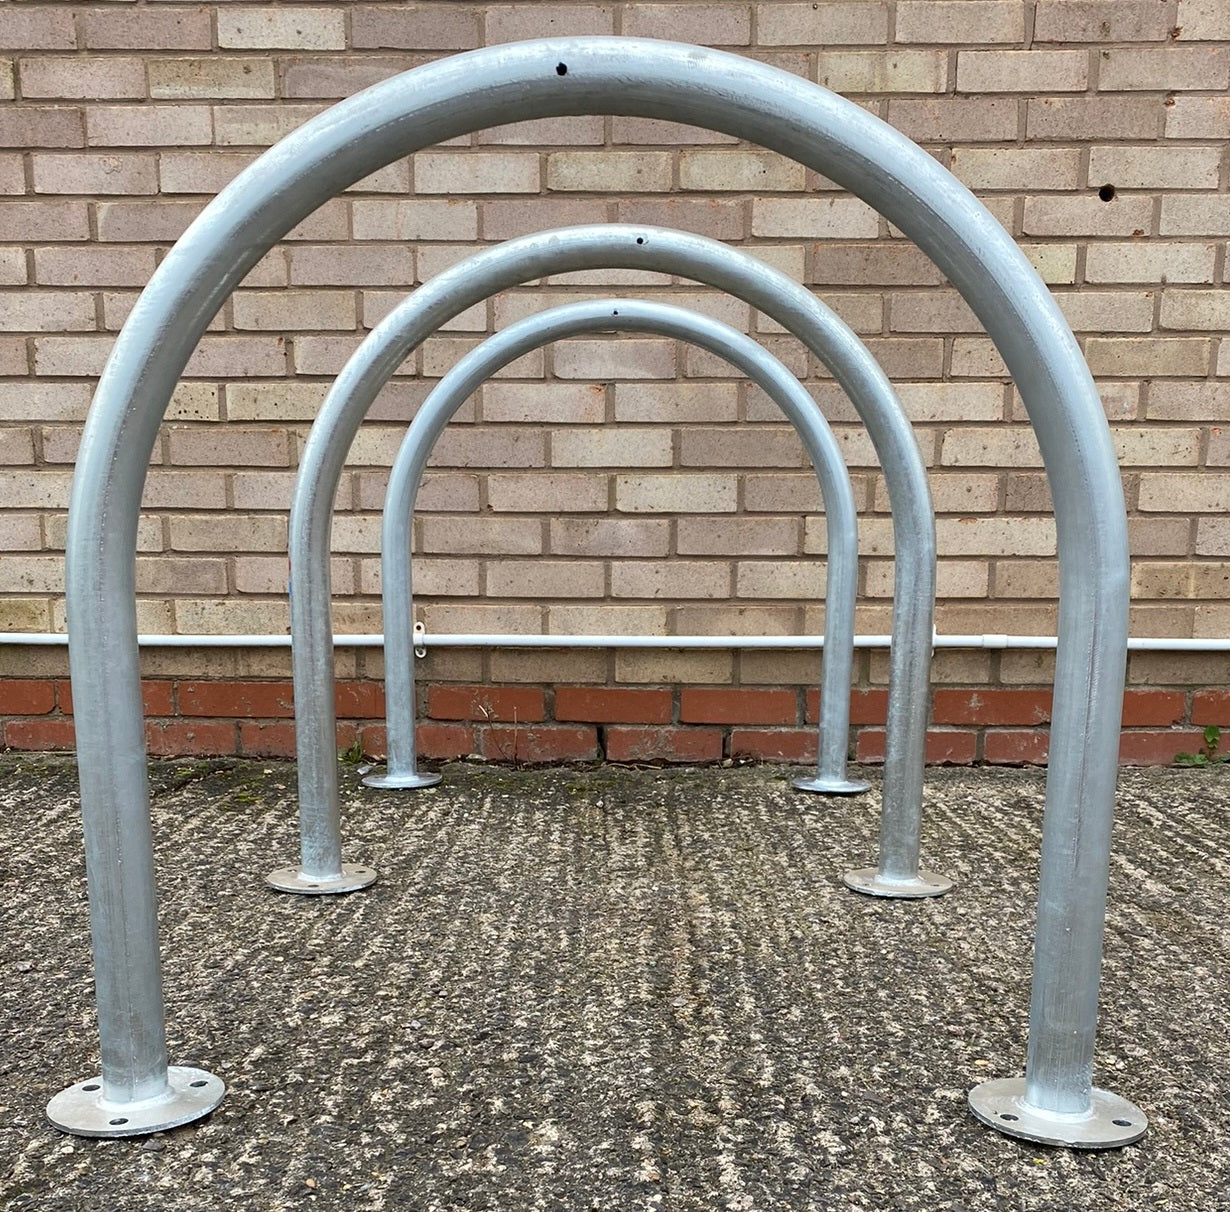 48mm Dia. Kirby Cycle Stand - Toast Rack Style Cycle Storage